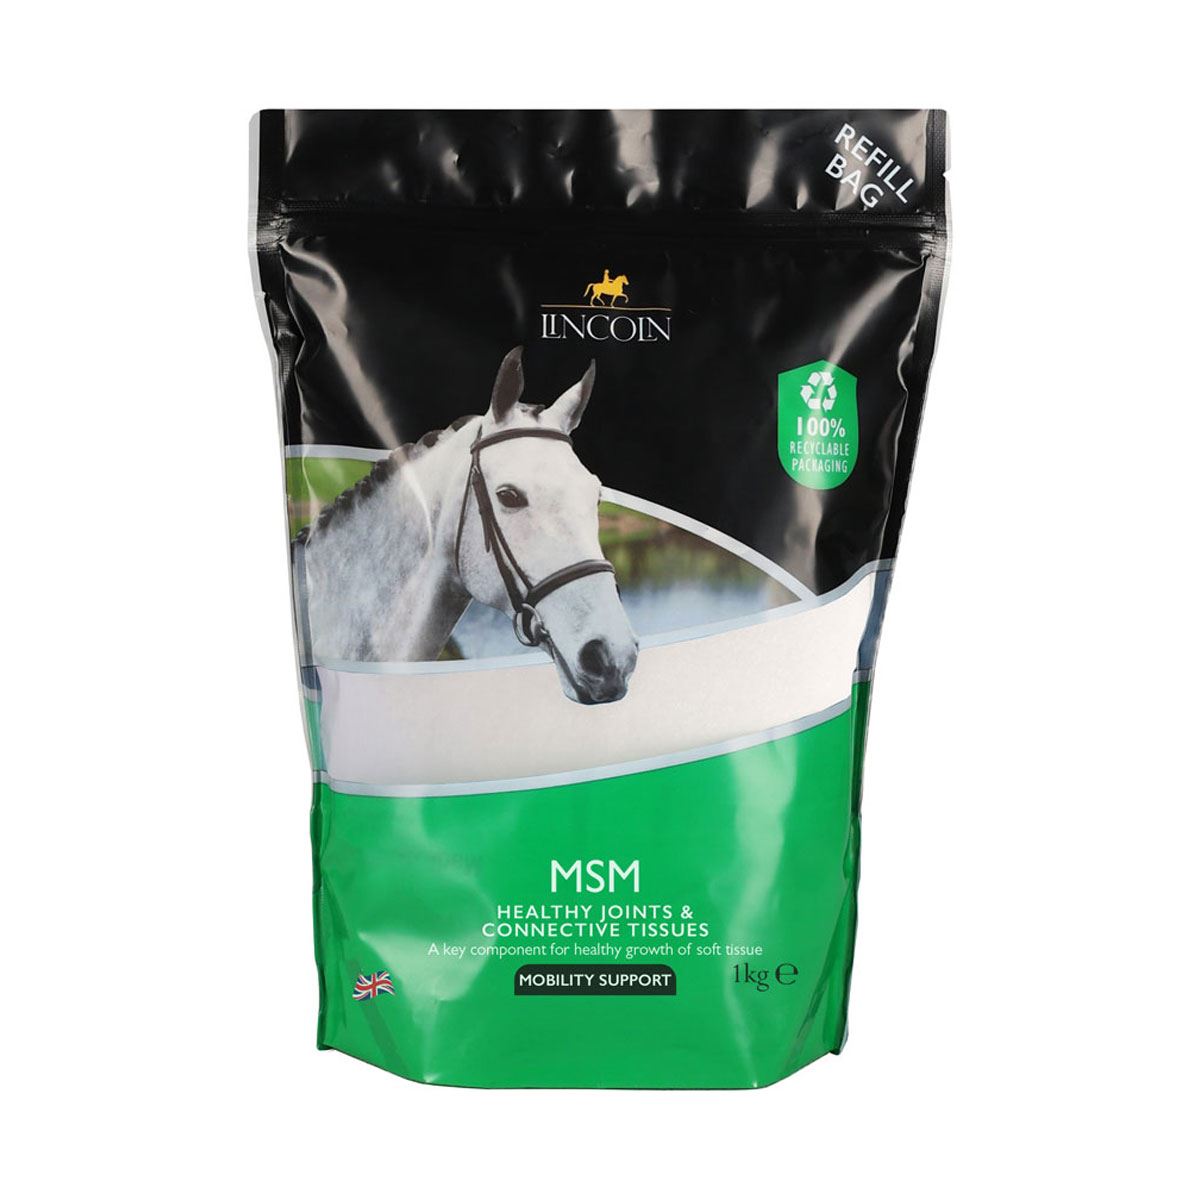 Lincoln MSM Refill Pouch - Just Horse Riders